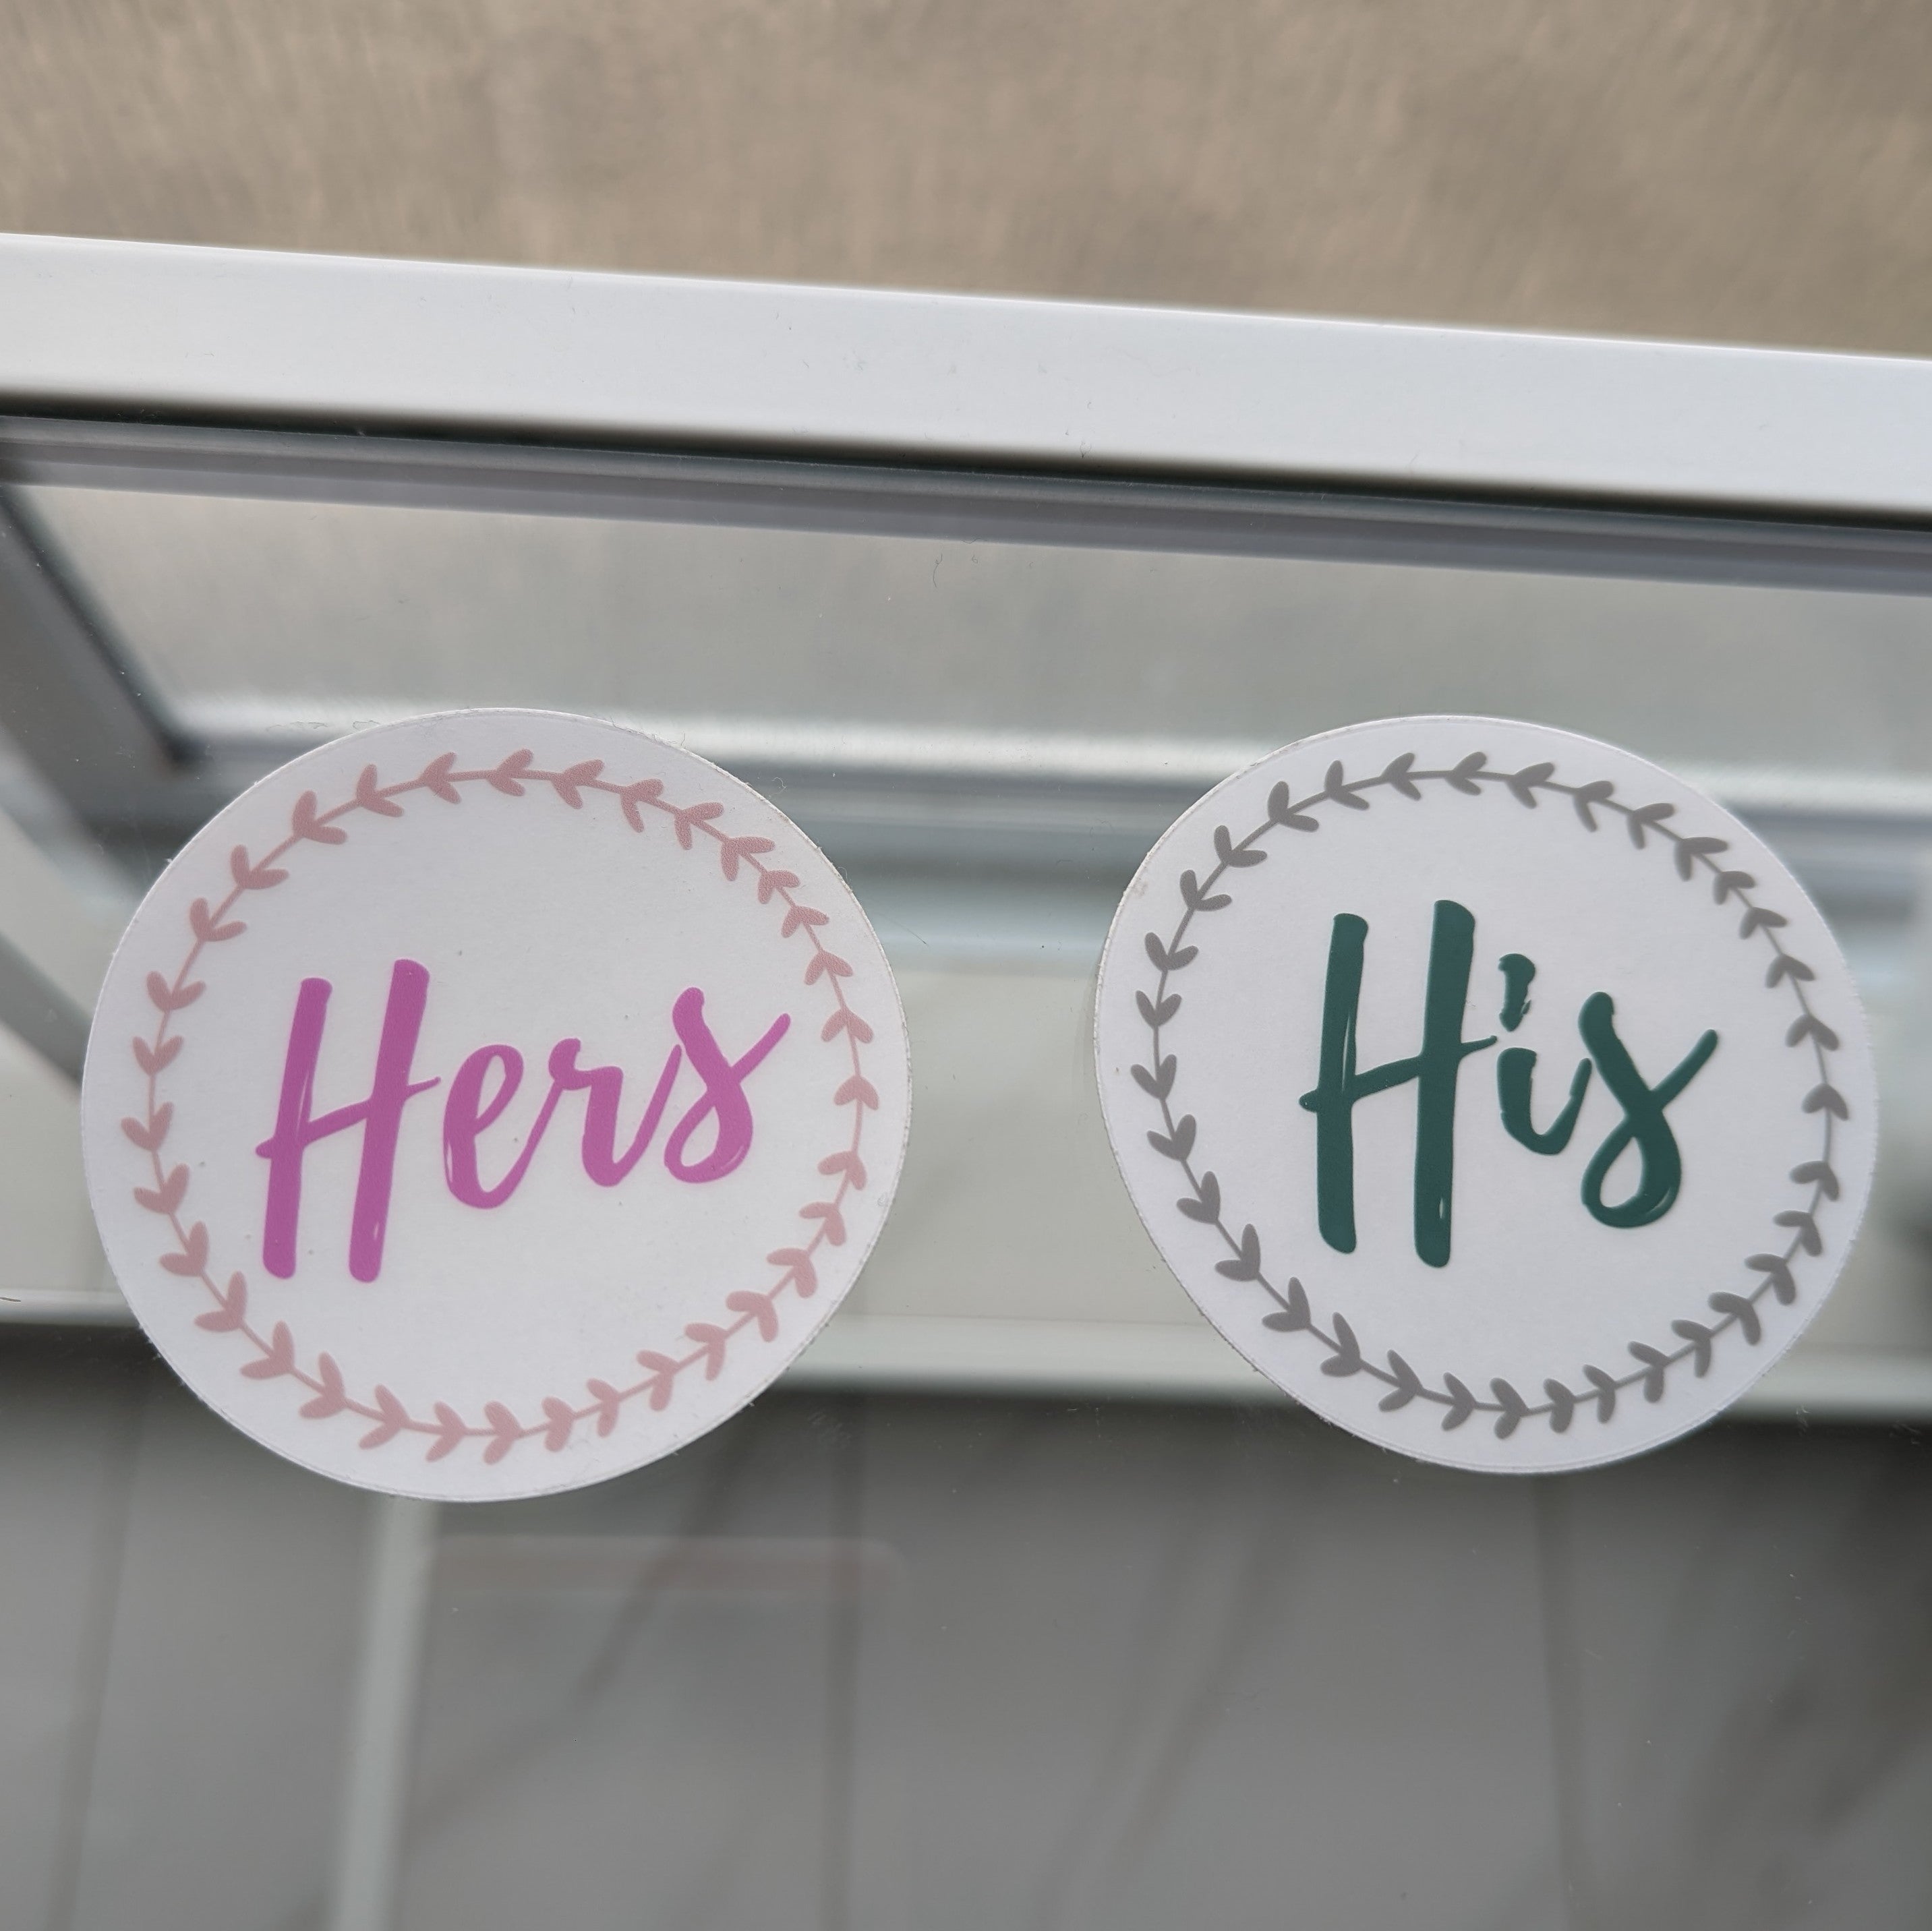 Clear Dishwasher-Safe Sticker (Hers, His)